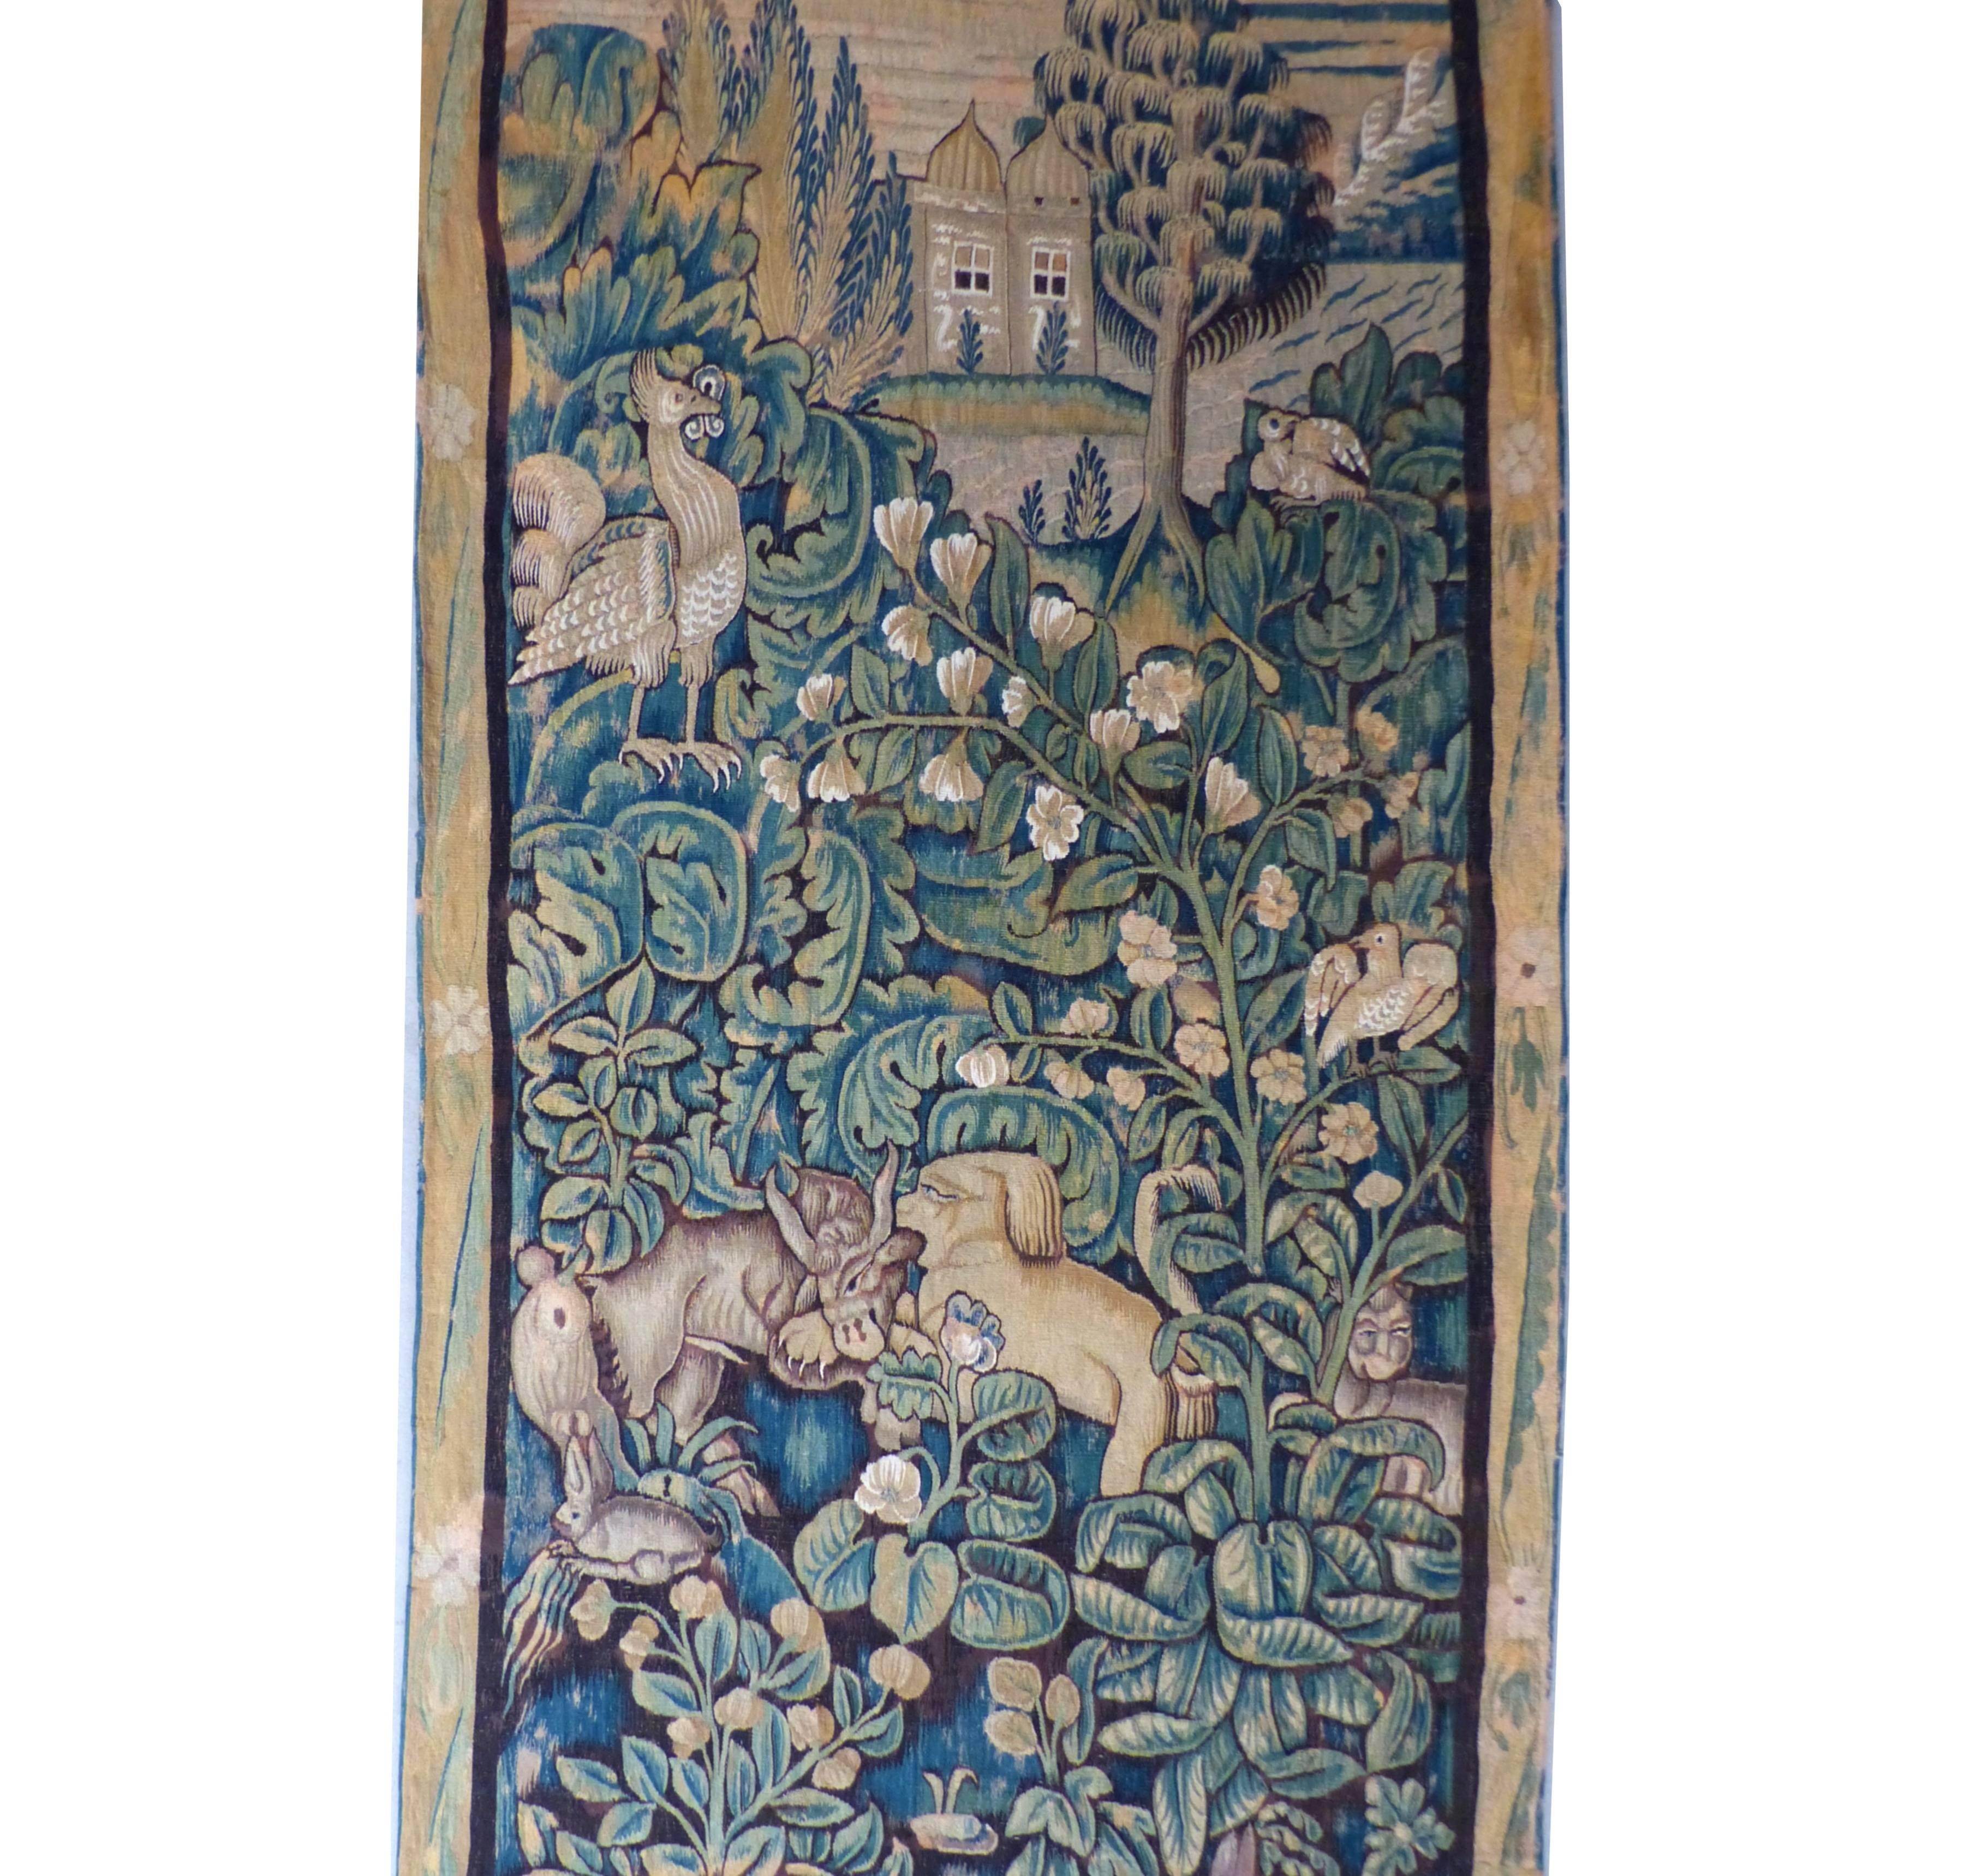 Flemish fragment, Oudenaarde. Second half of the 16th century. 
The aristolocche with animals and birds shows large leaves.
The aristoloche leaves were an item of decor fashion during the 16th century and appeared in works mostly woven in the